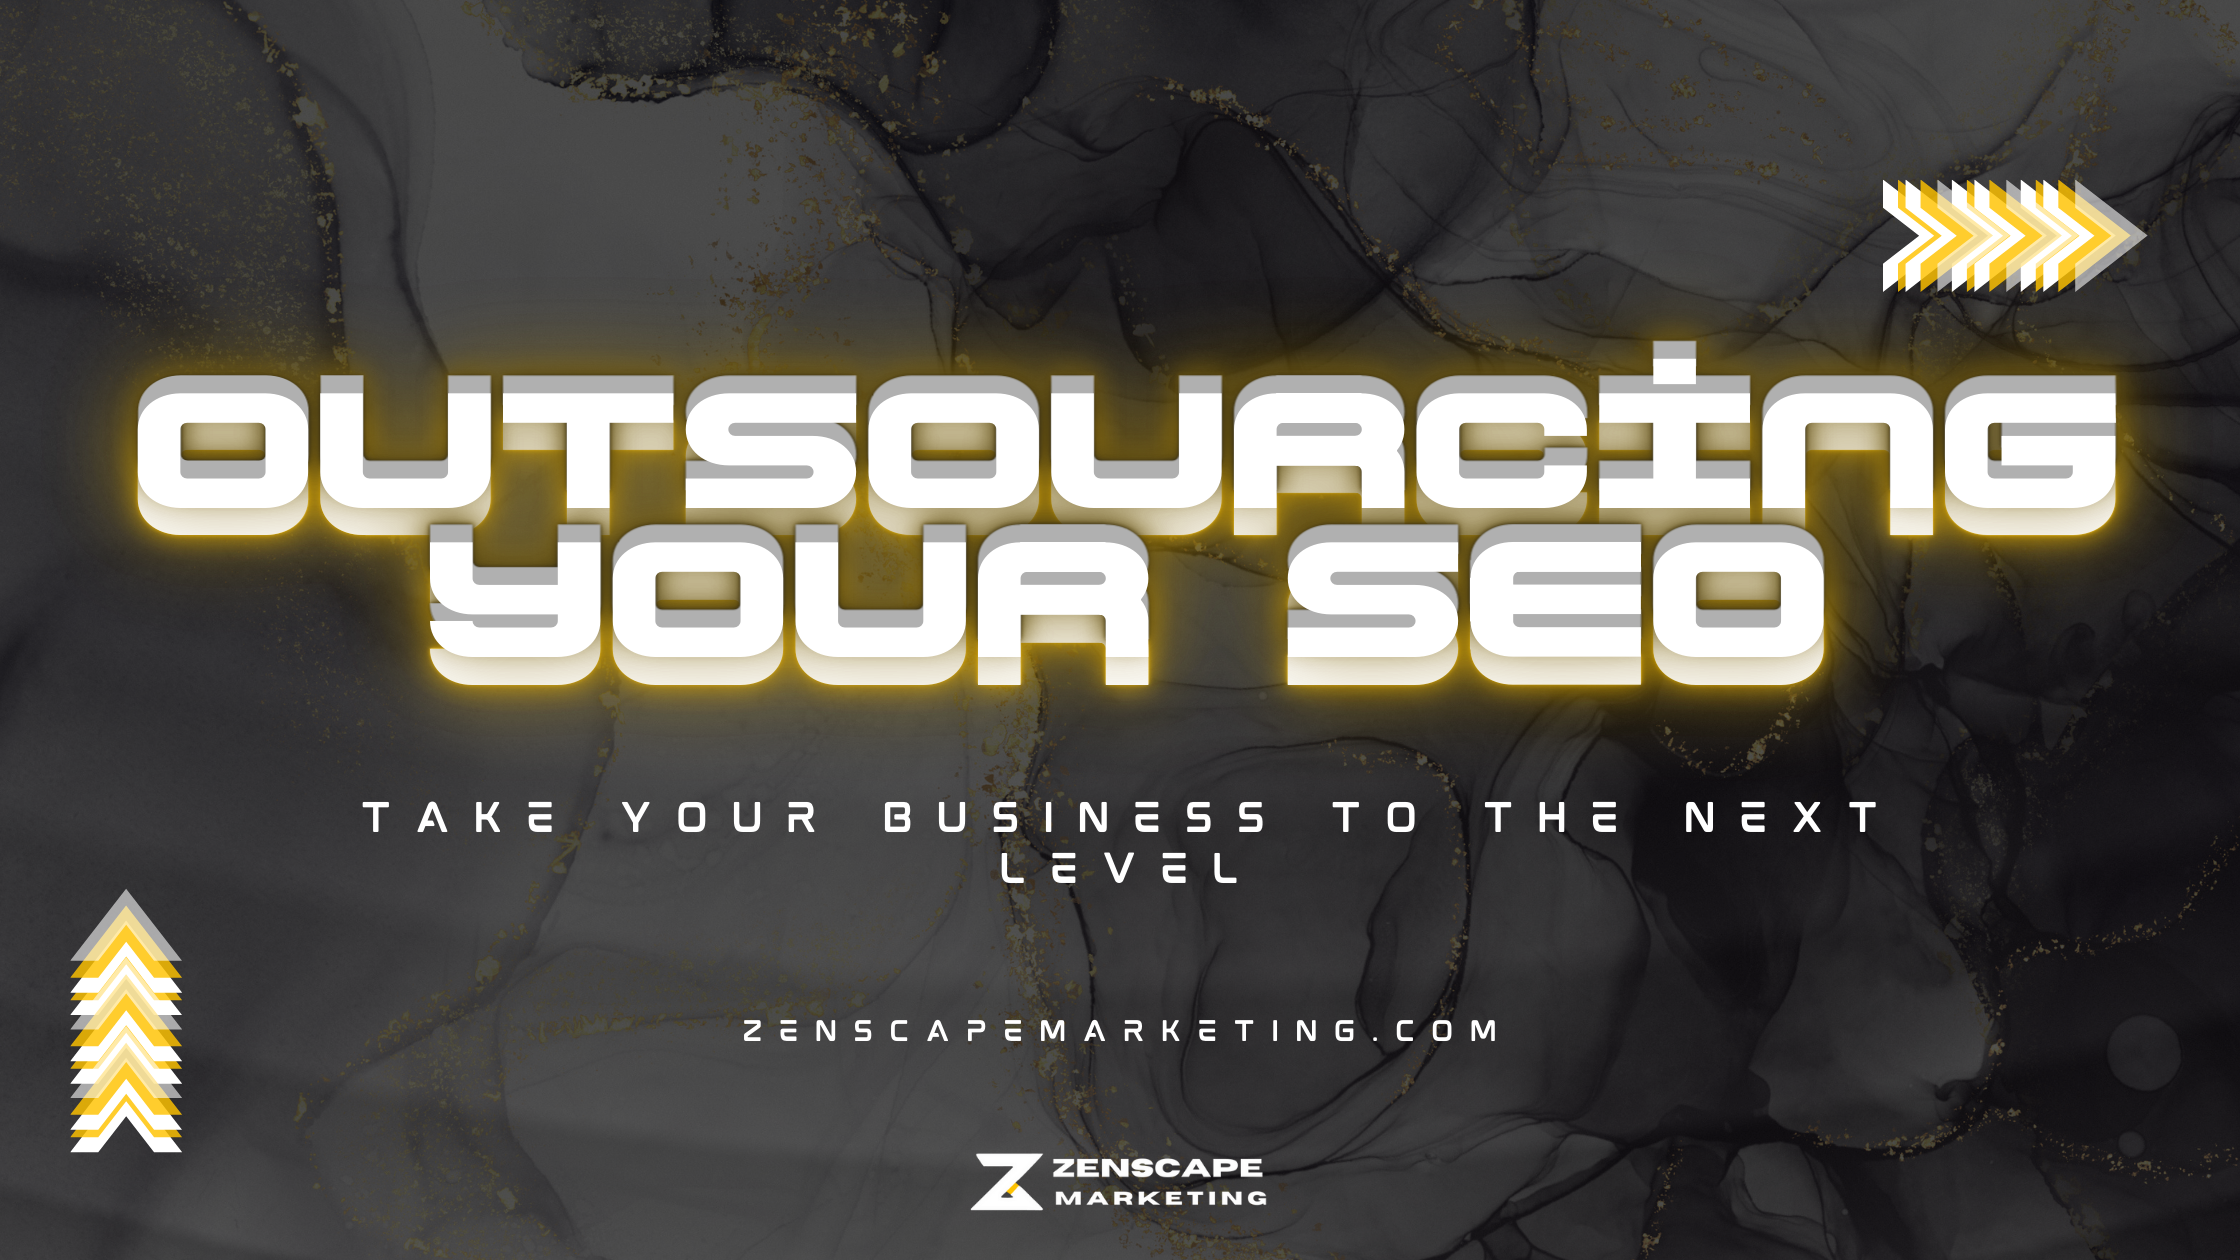 Outsourcing Your SEO